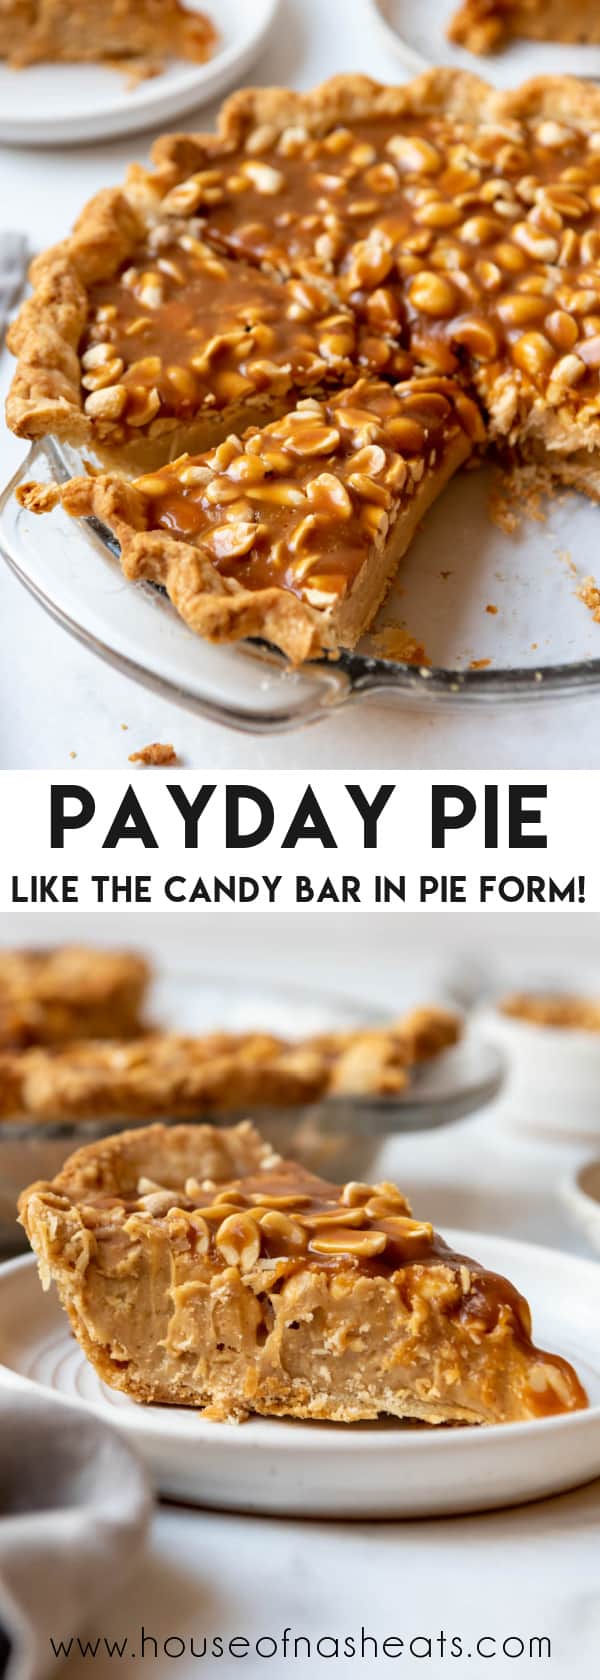 A collage of images of payday pie with text overlay.